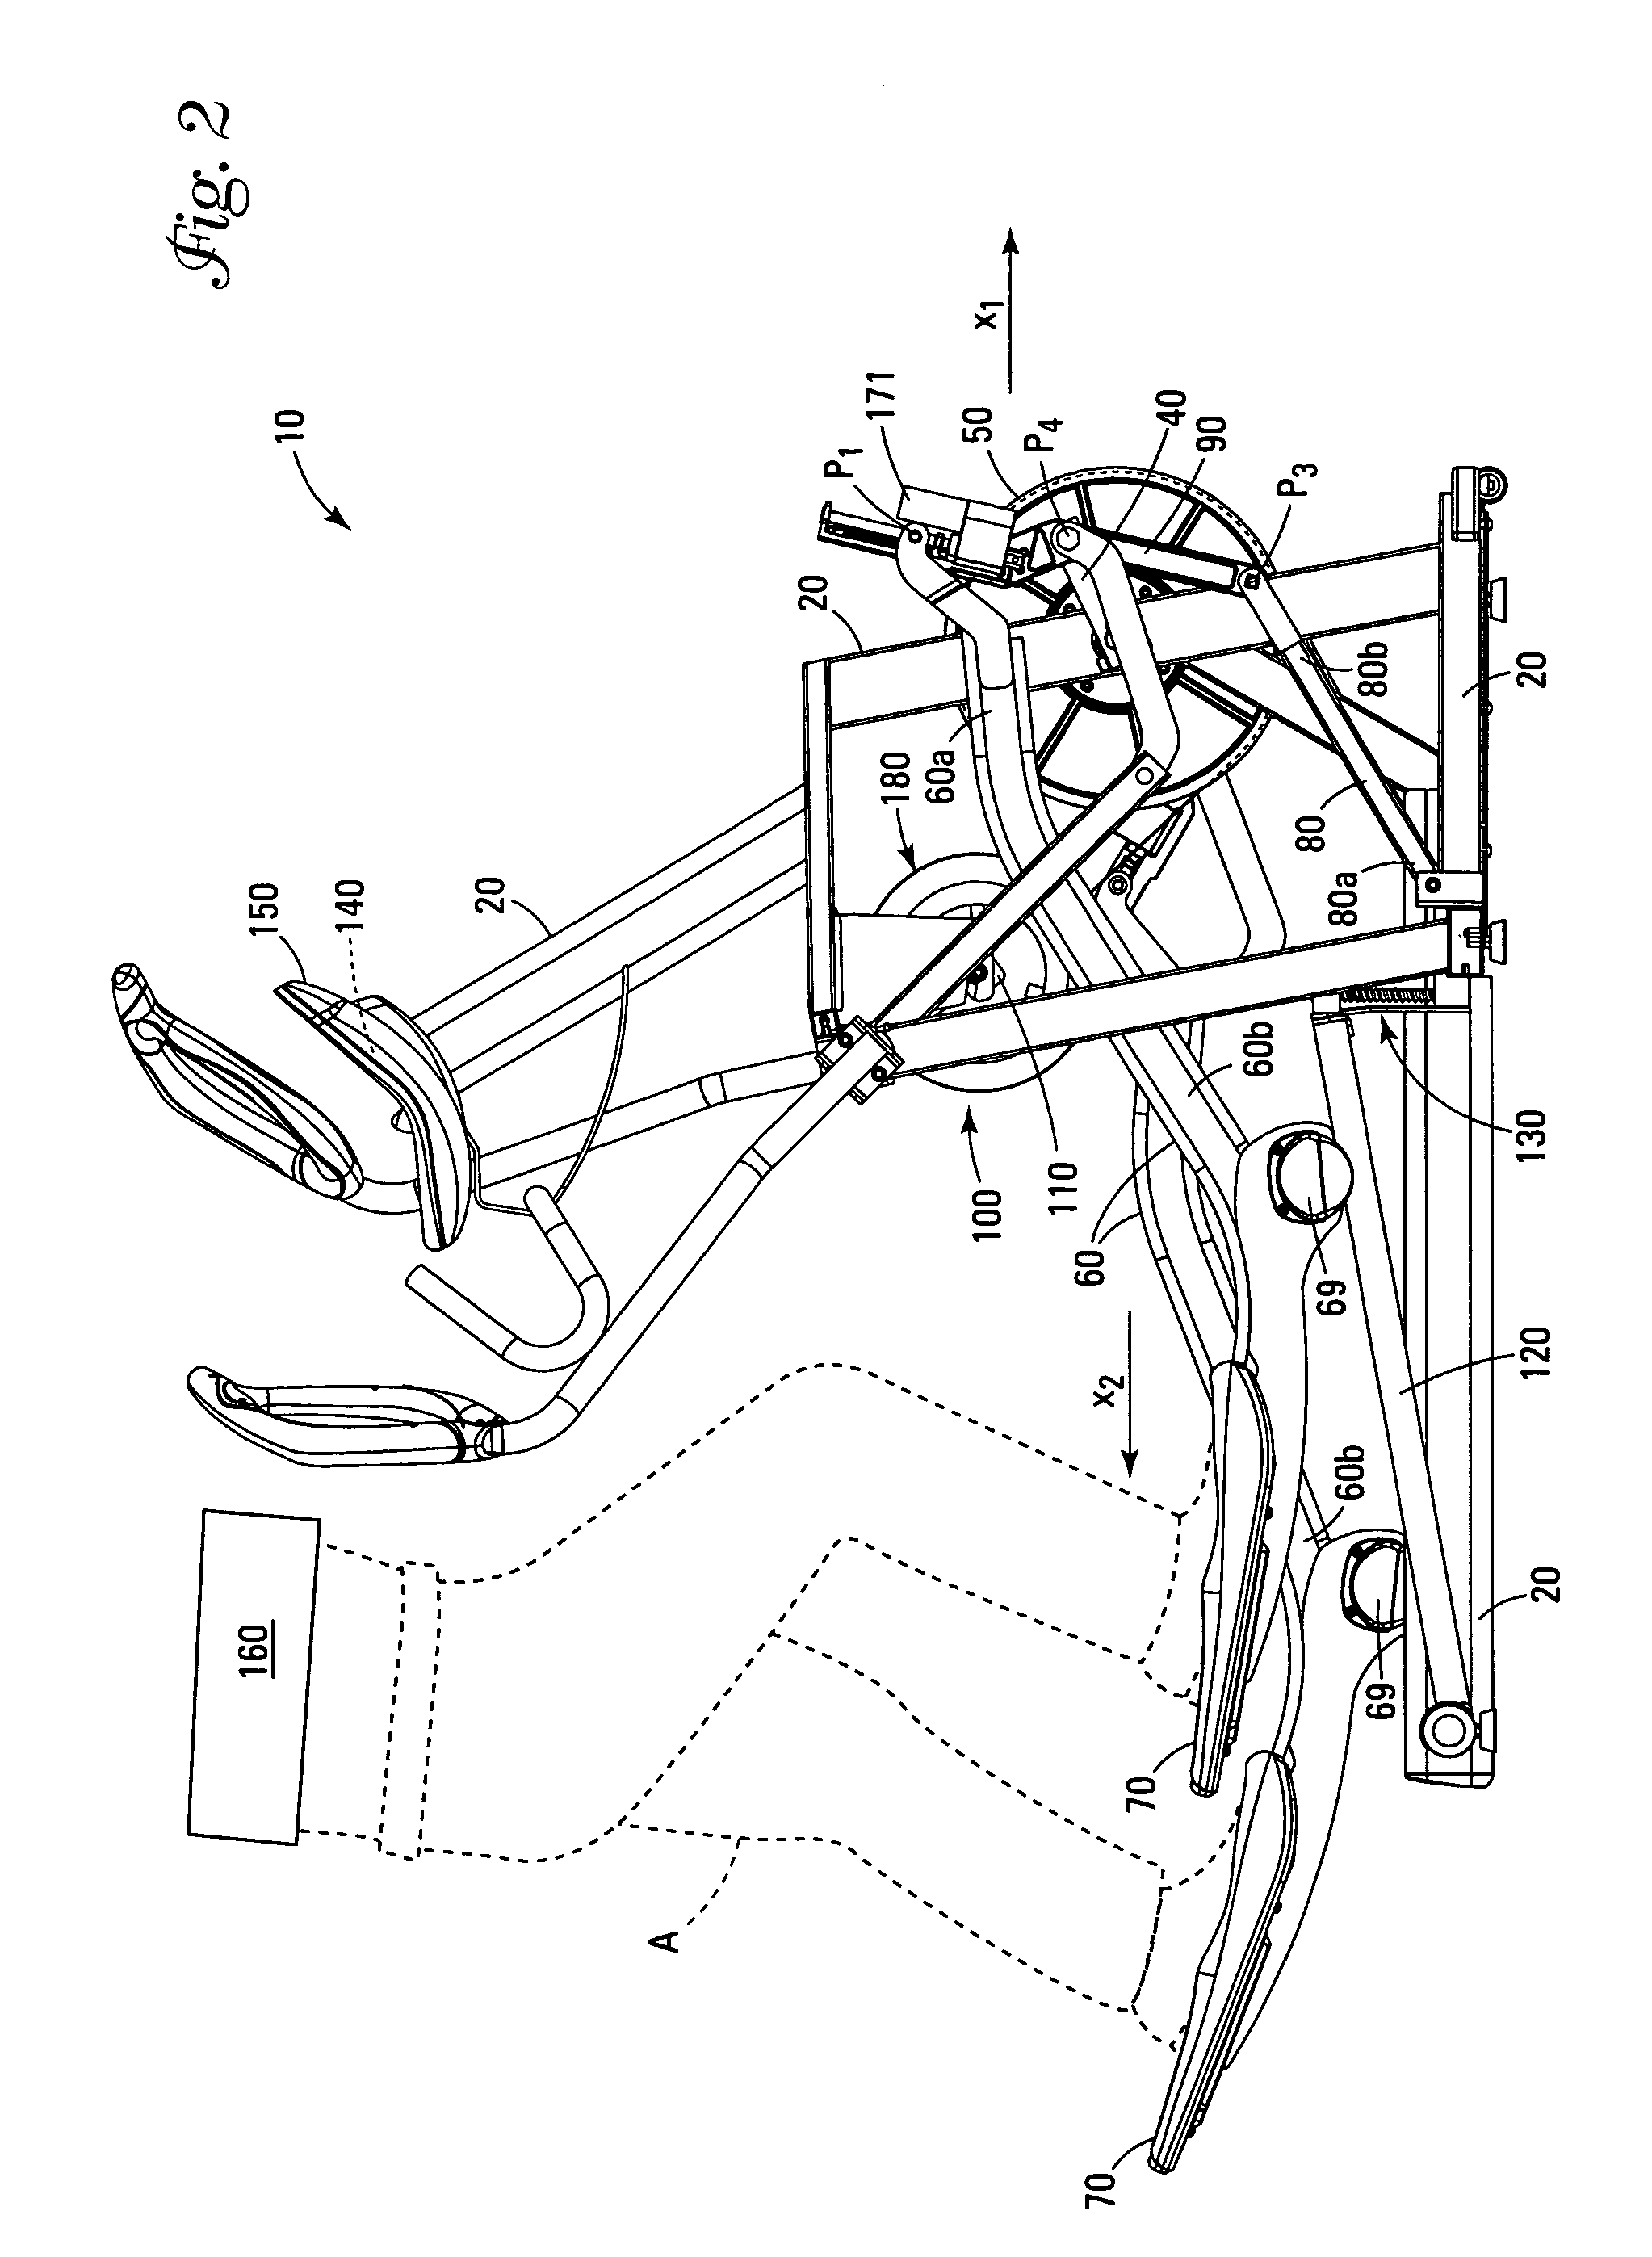 Exercise equipment with automatic adjustment of stride length and/or stride height based upon the heart rate of a person exercising on the exercise equipment